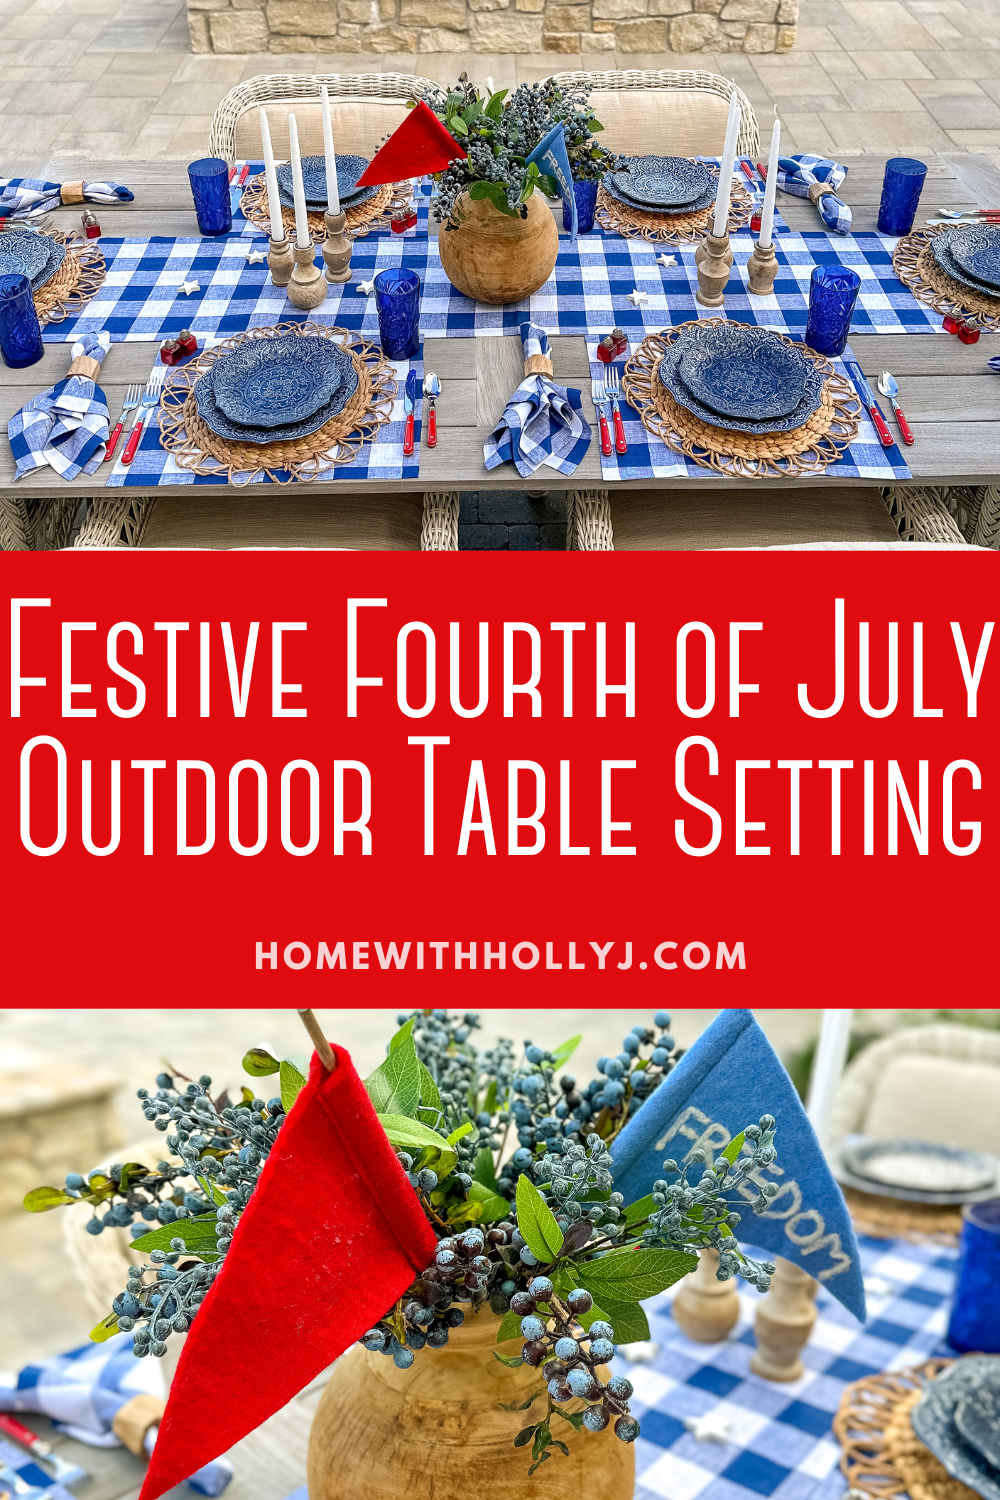 Looking to create the perfect patriotic outdoor tablescape? Get inspired with our Fourth of July table setting ideas.